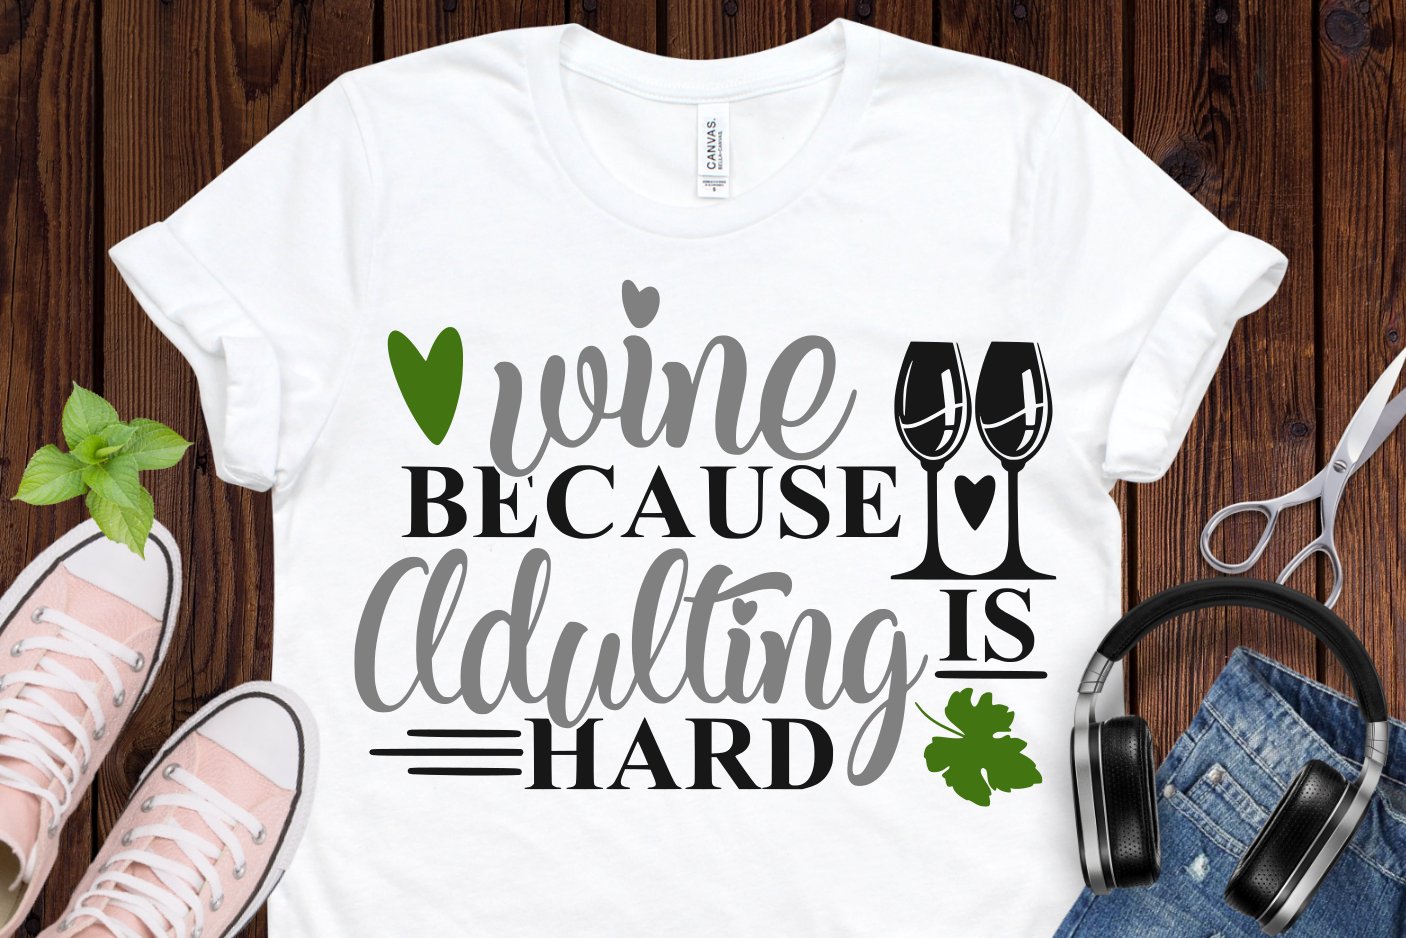 Classic white t-shirt with wine phrase.